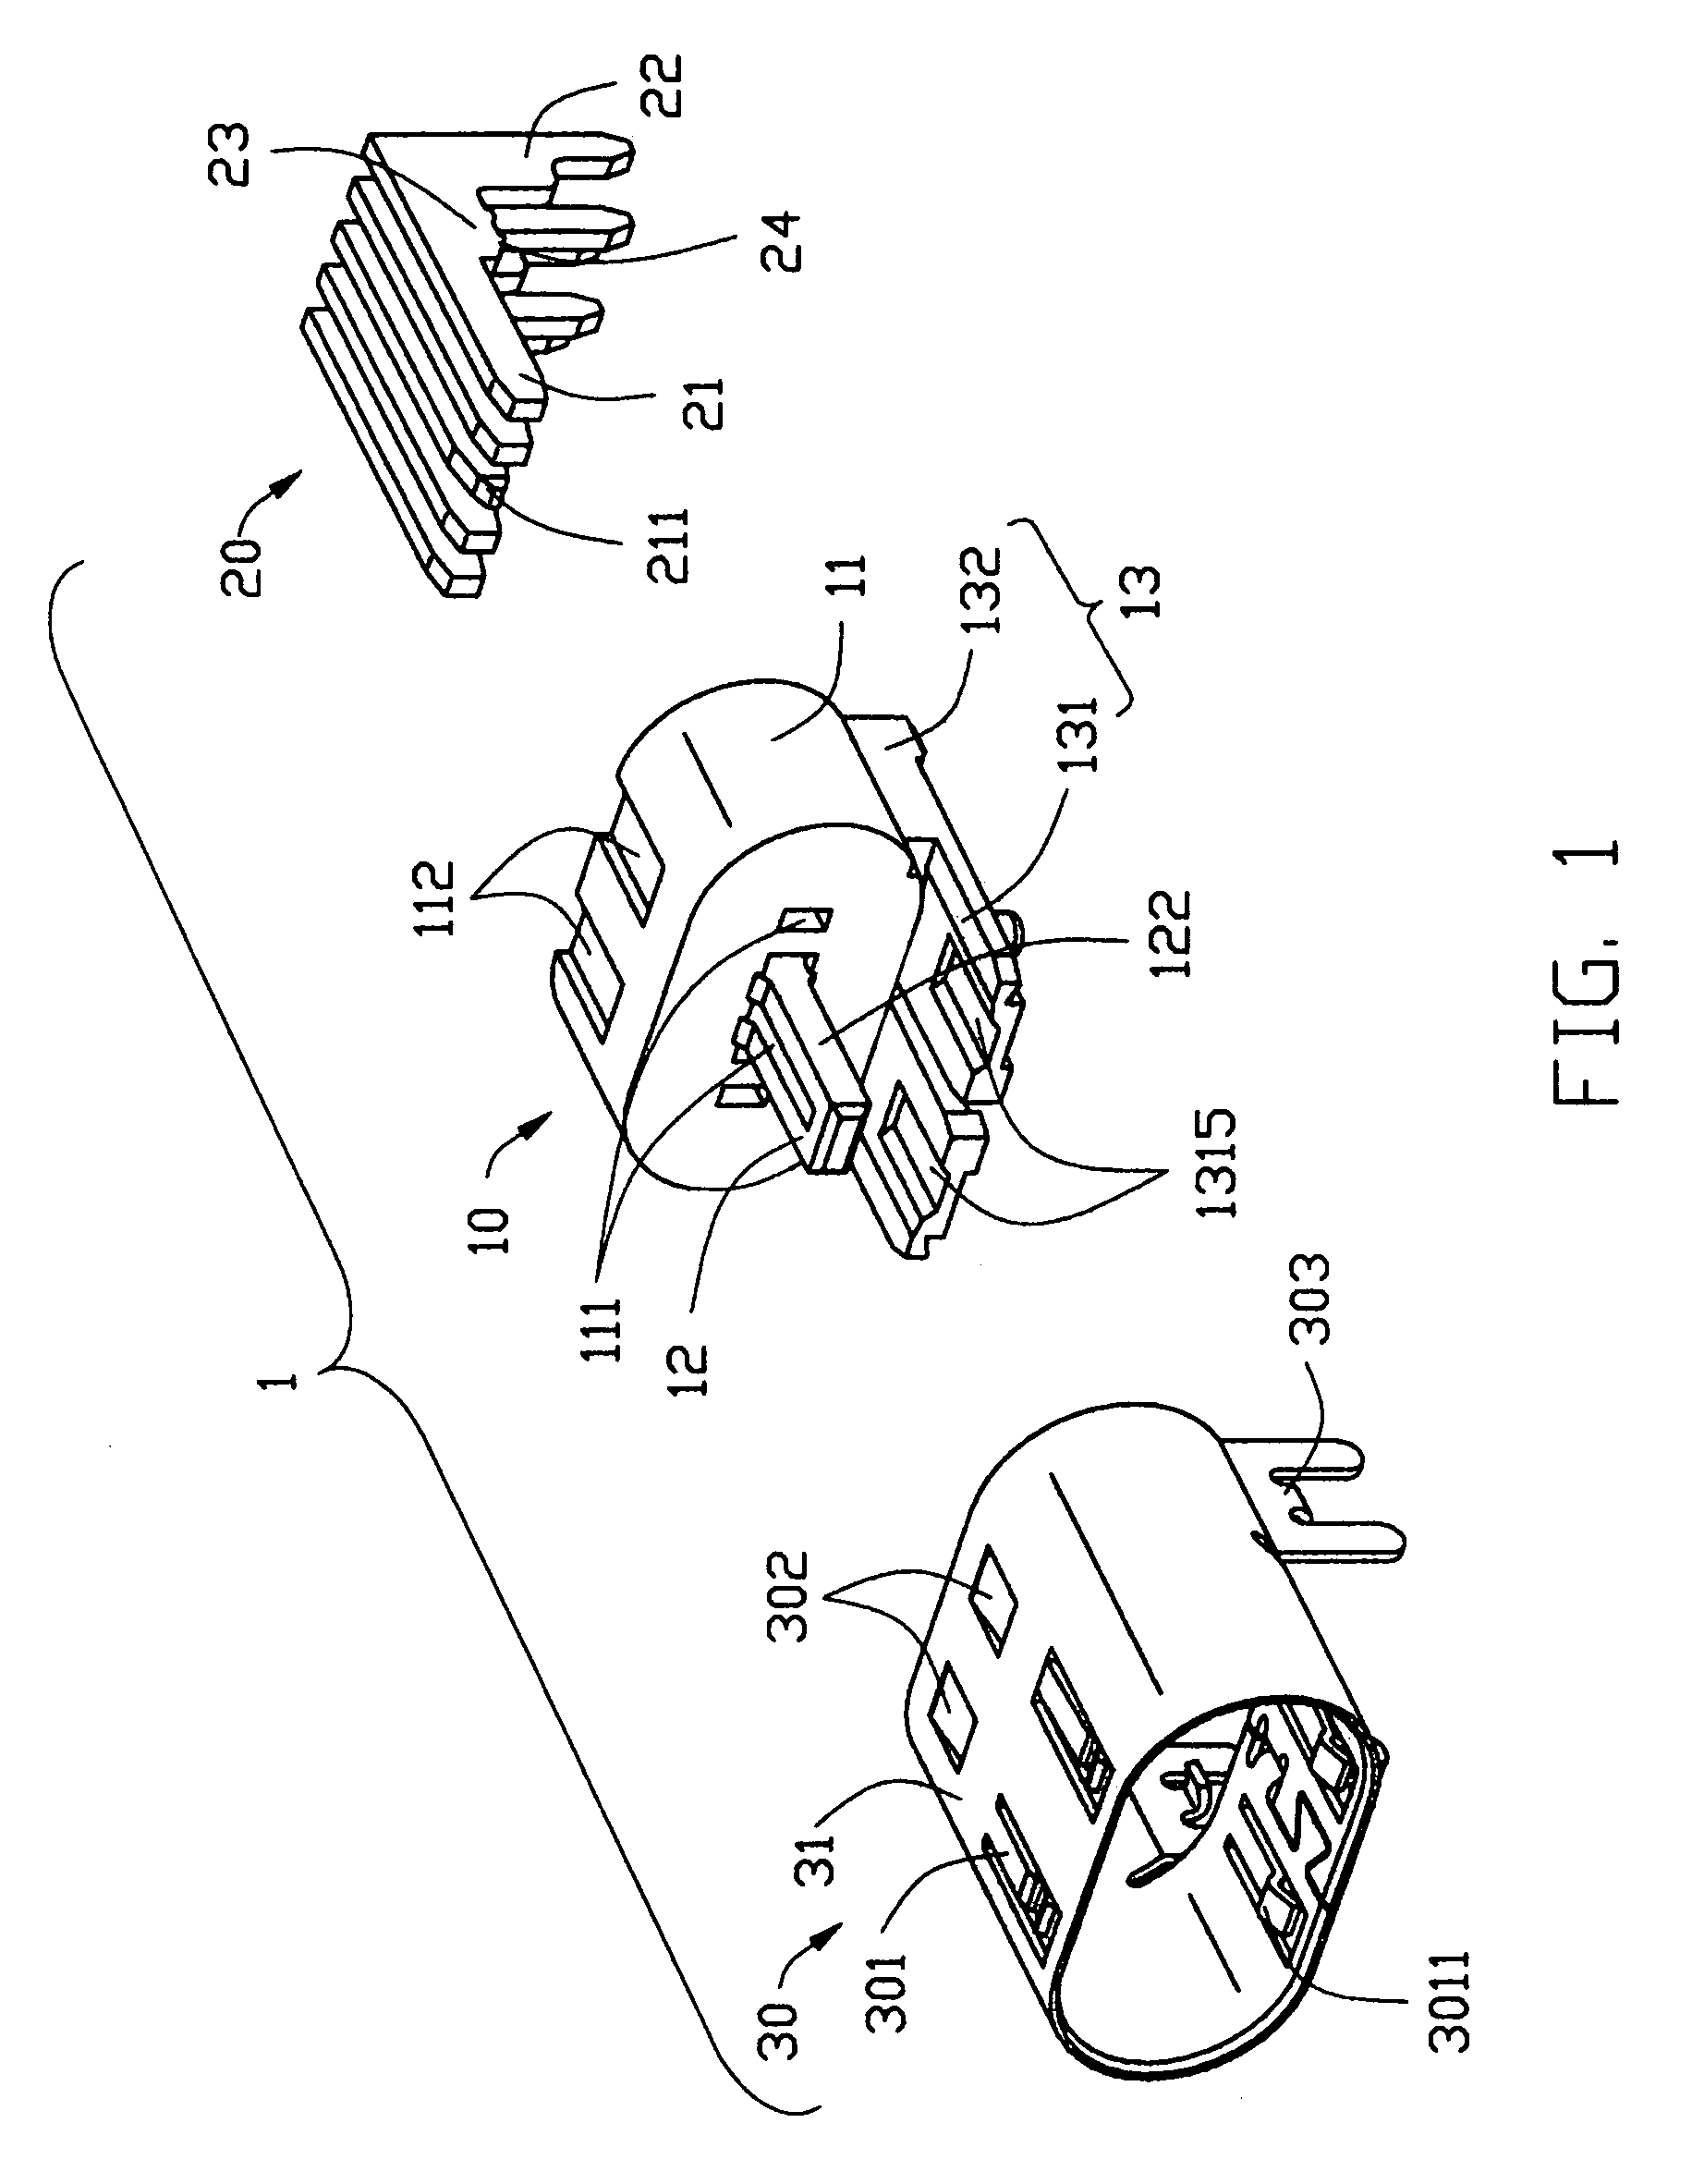 Electrical connector having improved structure regarding terminals